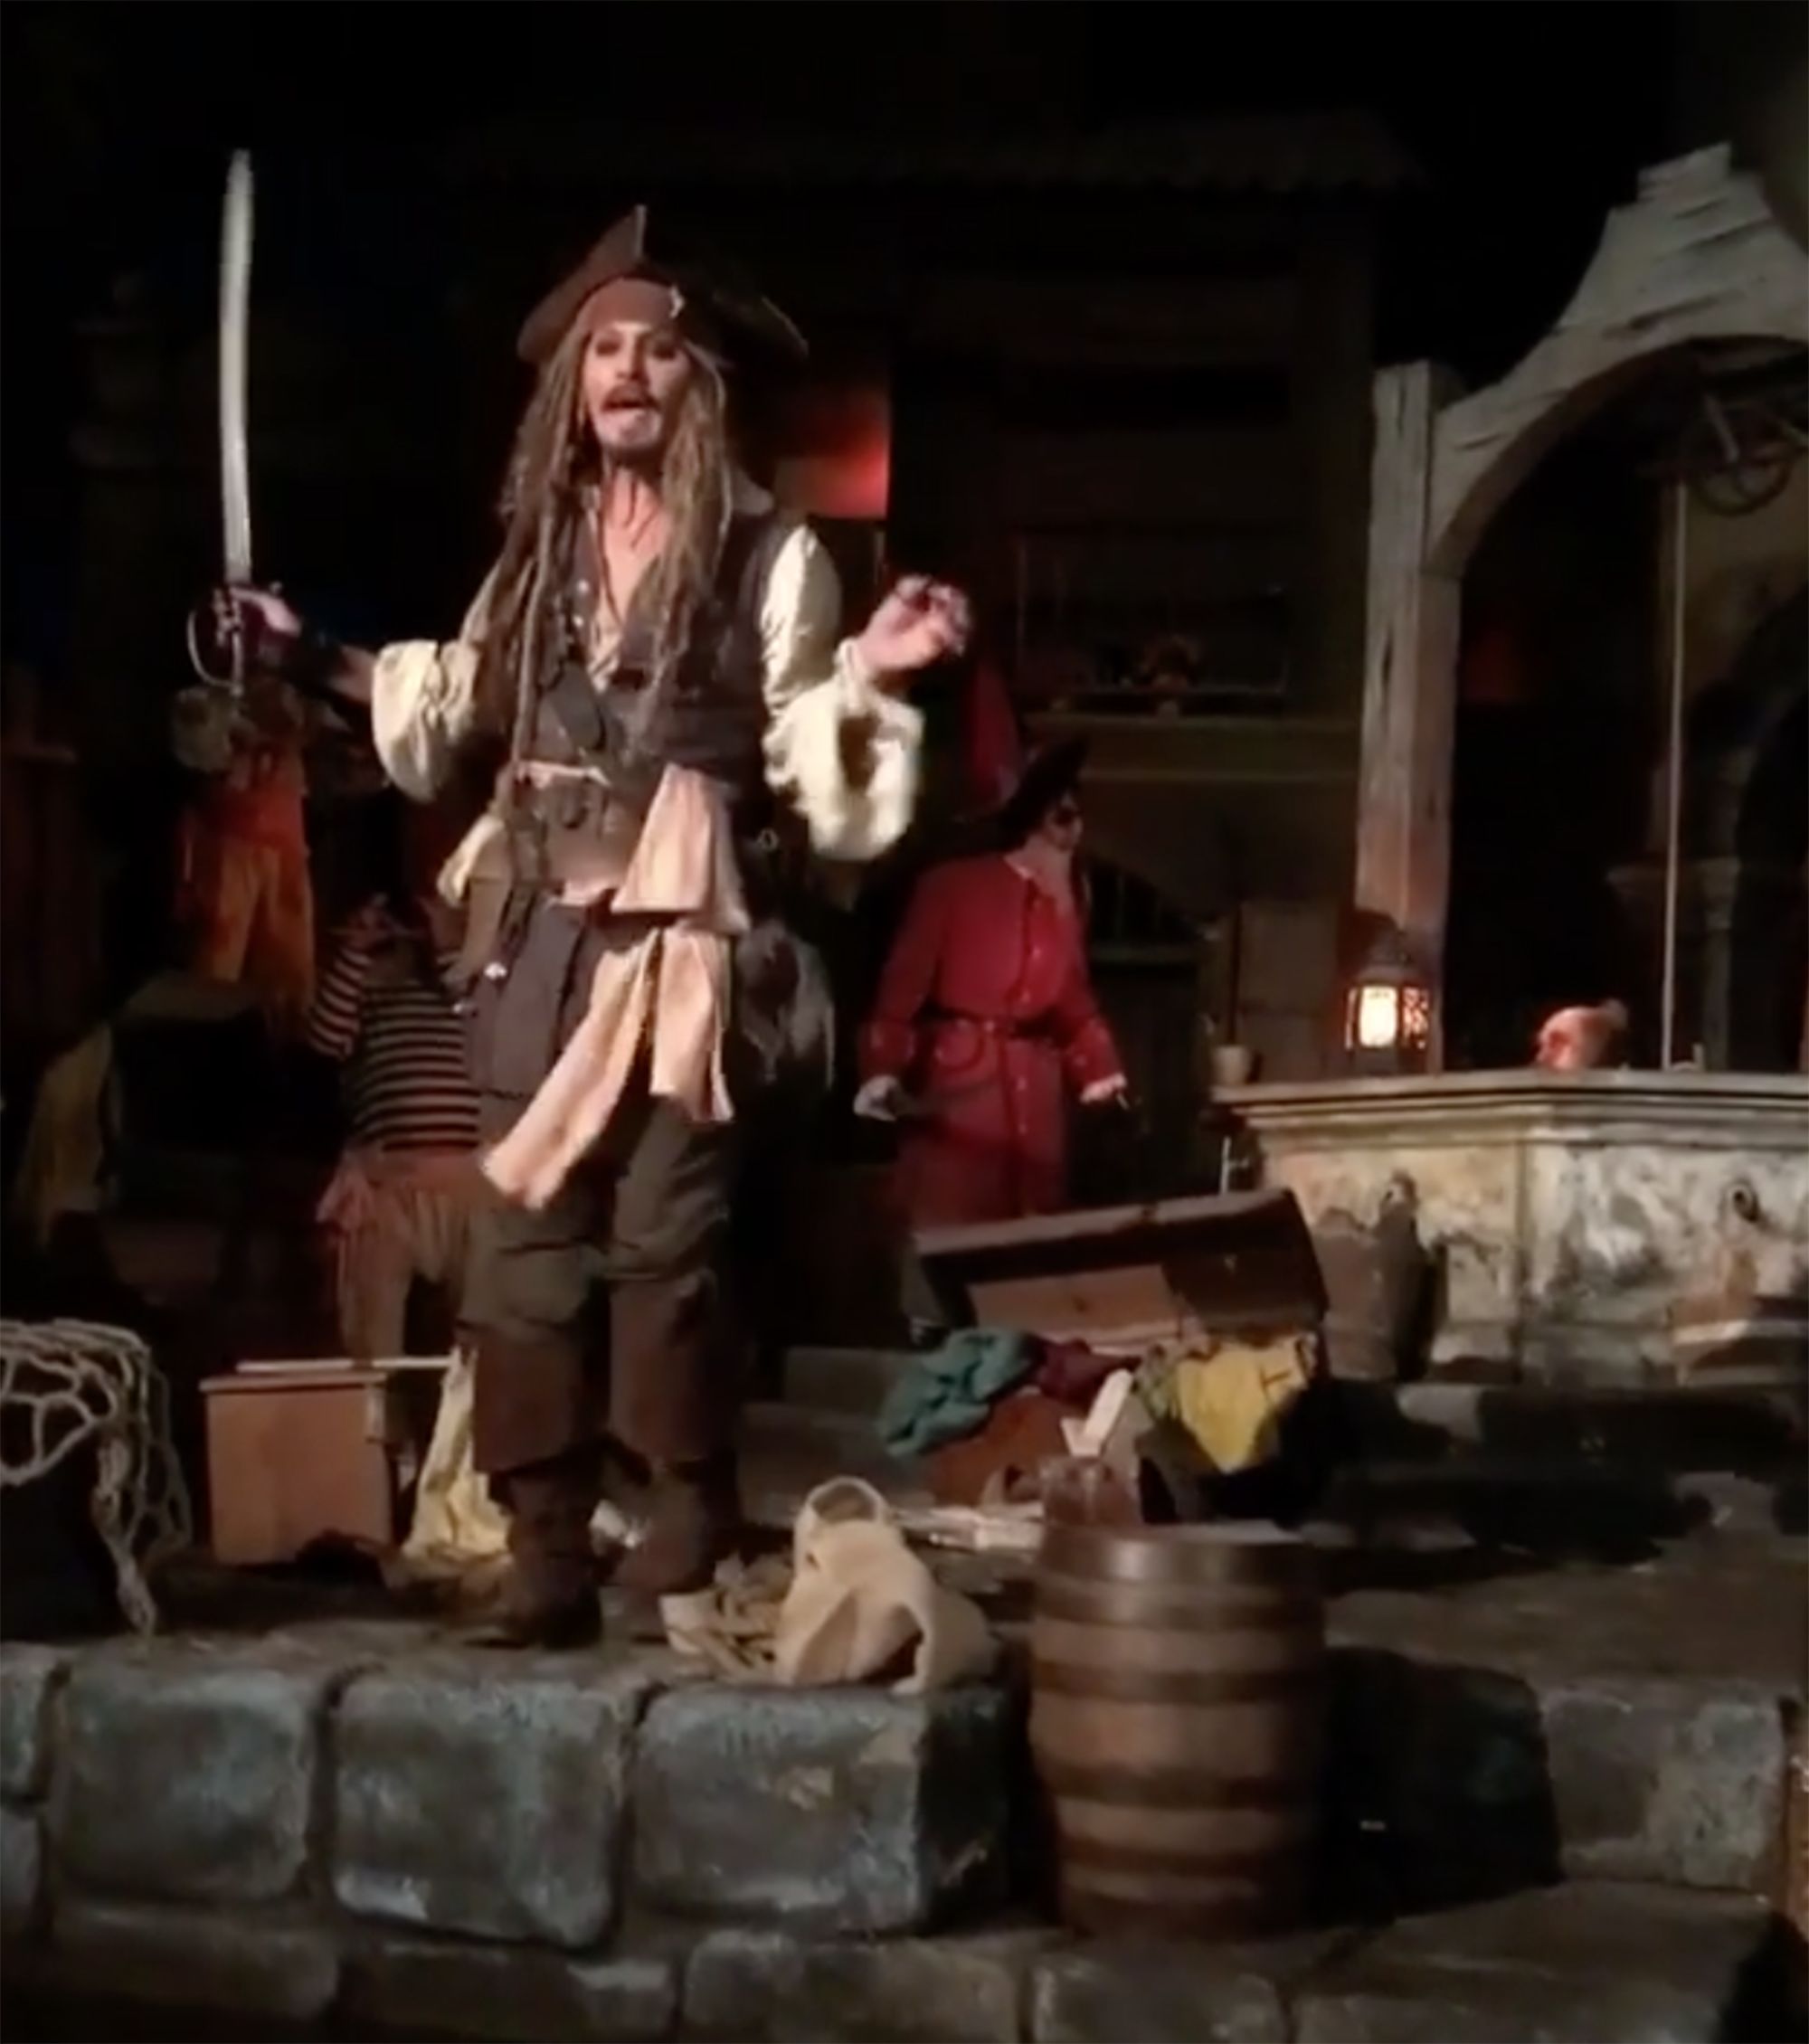 Pirates Of The Caribbean Ride Reopens With Johnny Depp's Captain Jack  Sparrow Intact At Disneyland & This Could Be A Major Hint Of A Comeback!